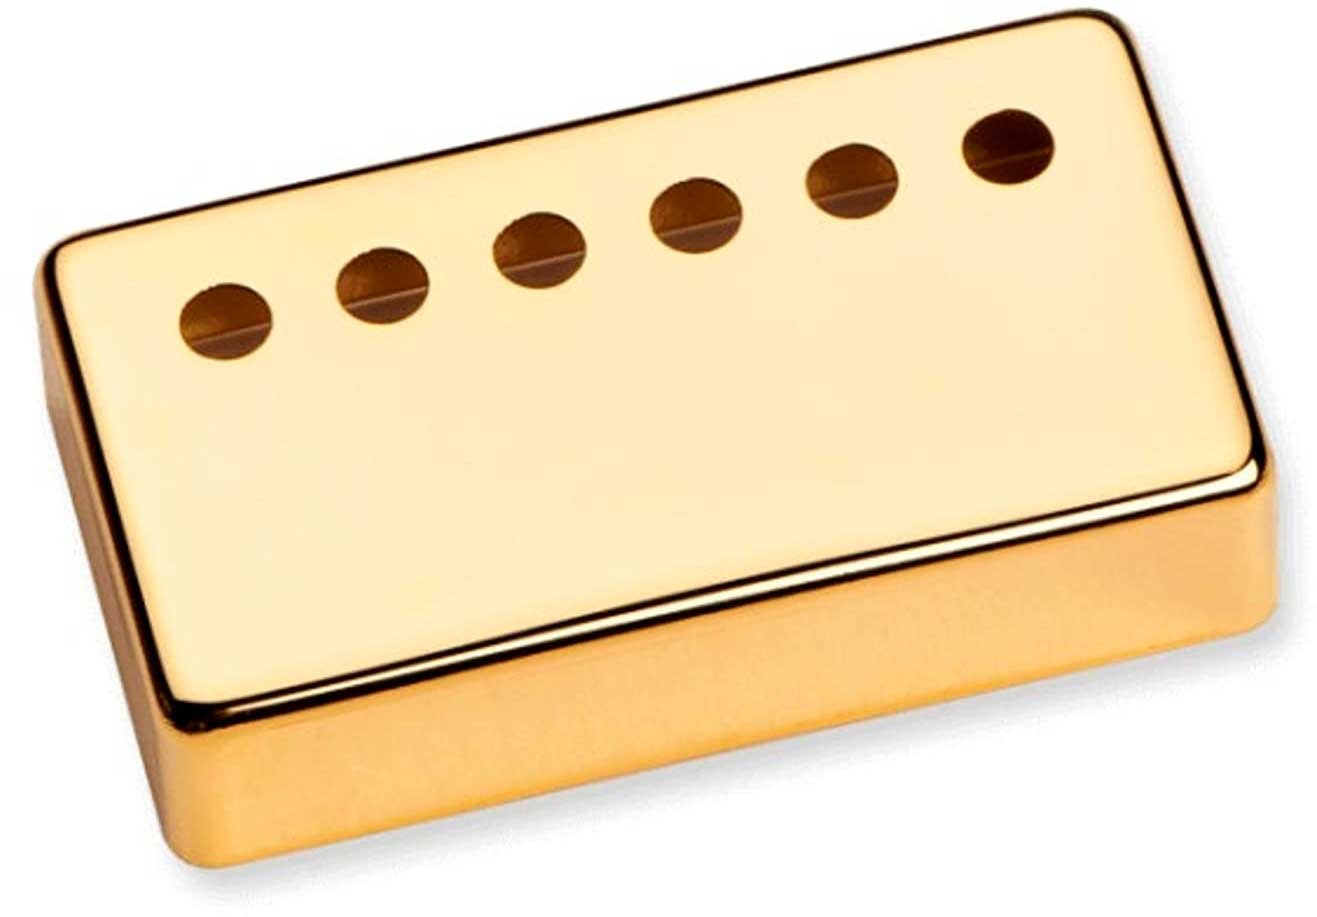 SEYMOUR DUNCAN HB-COVER GOLD